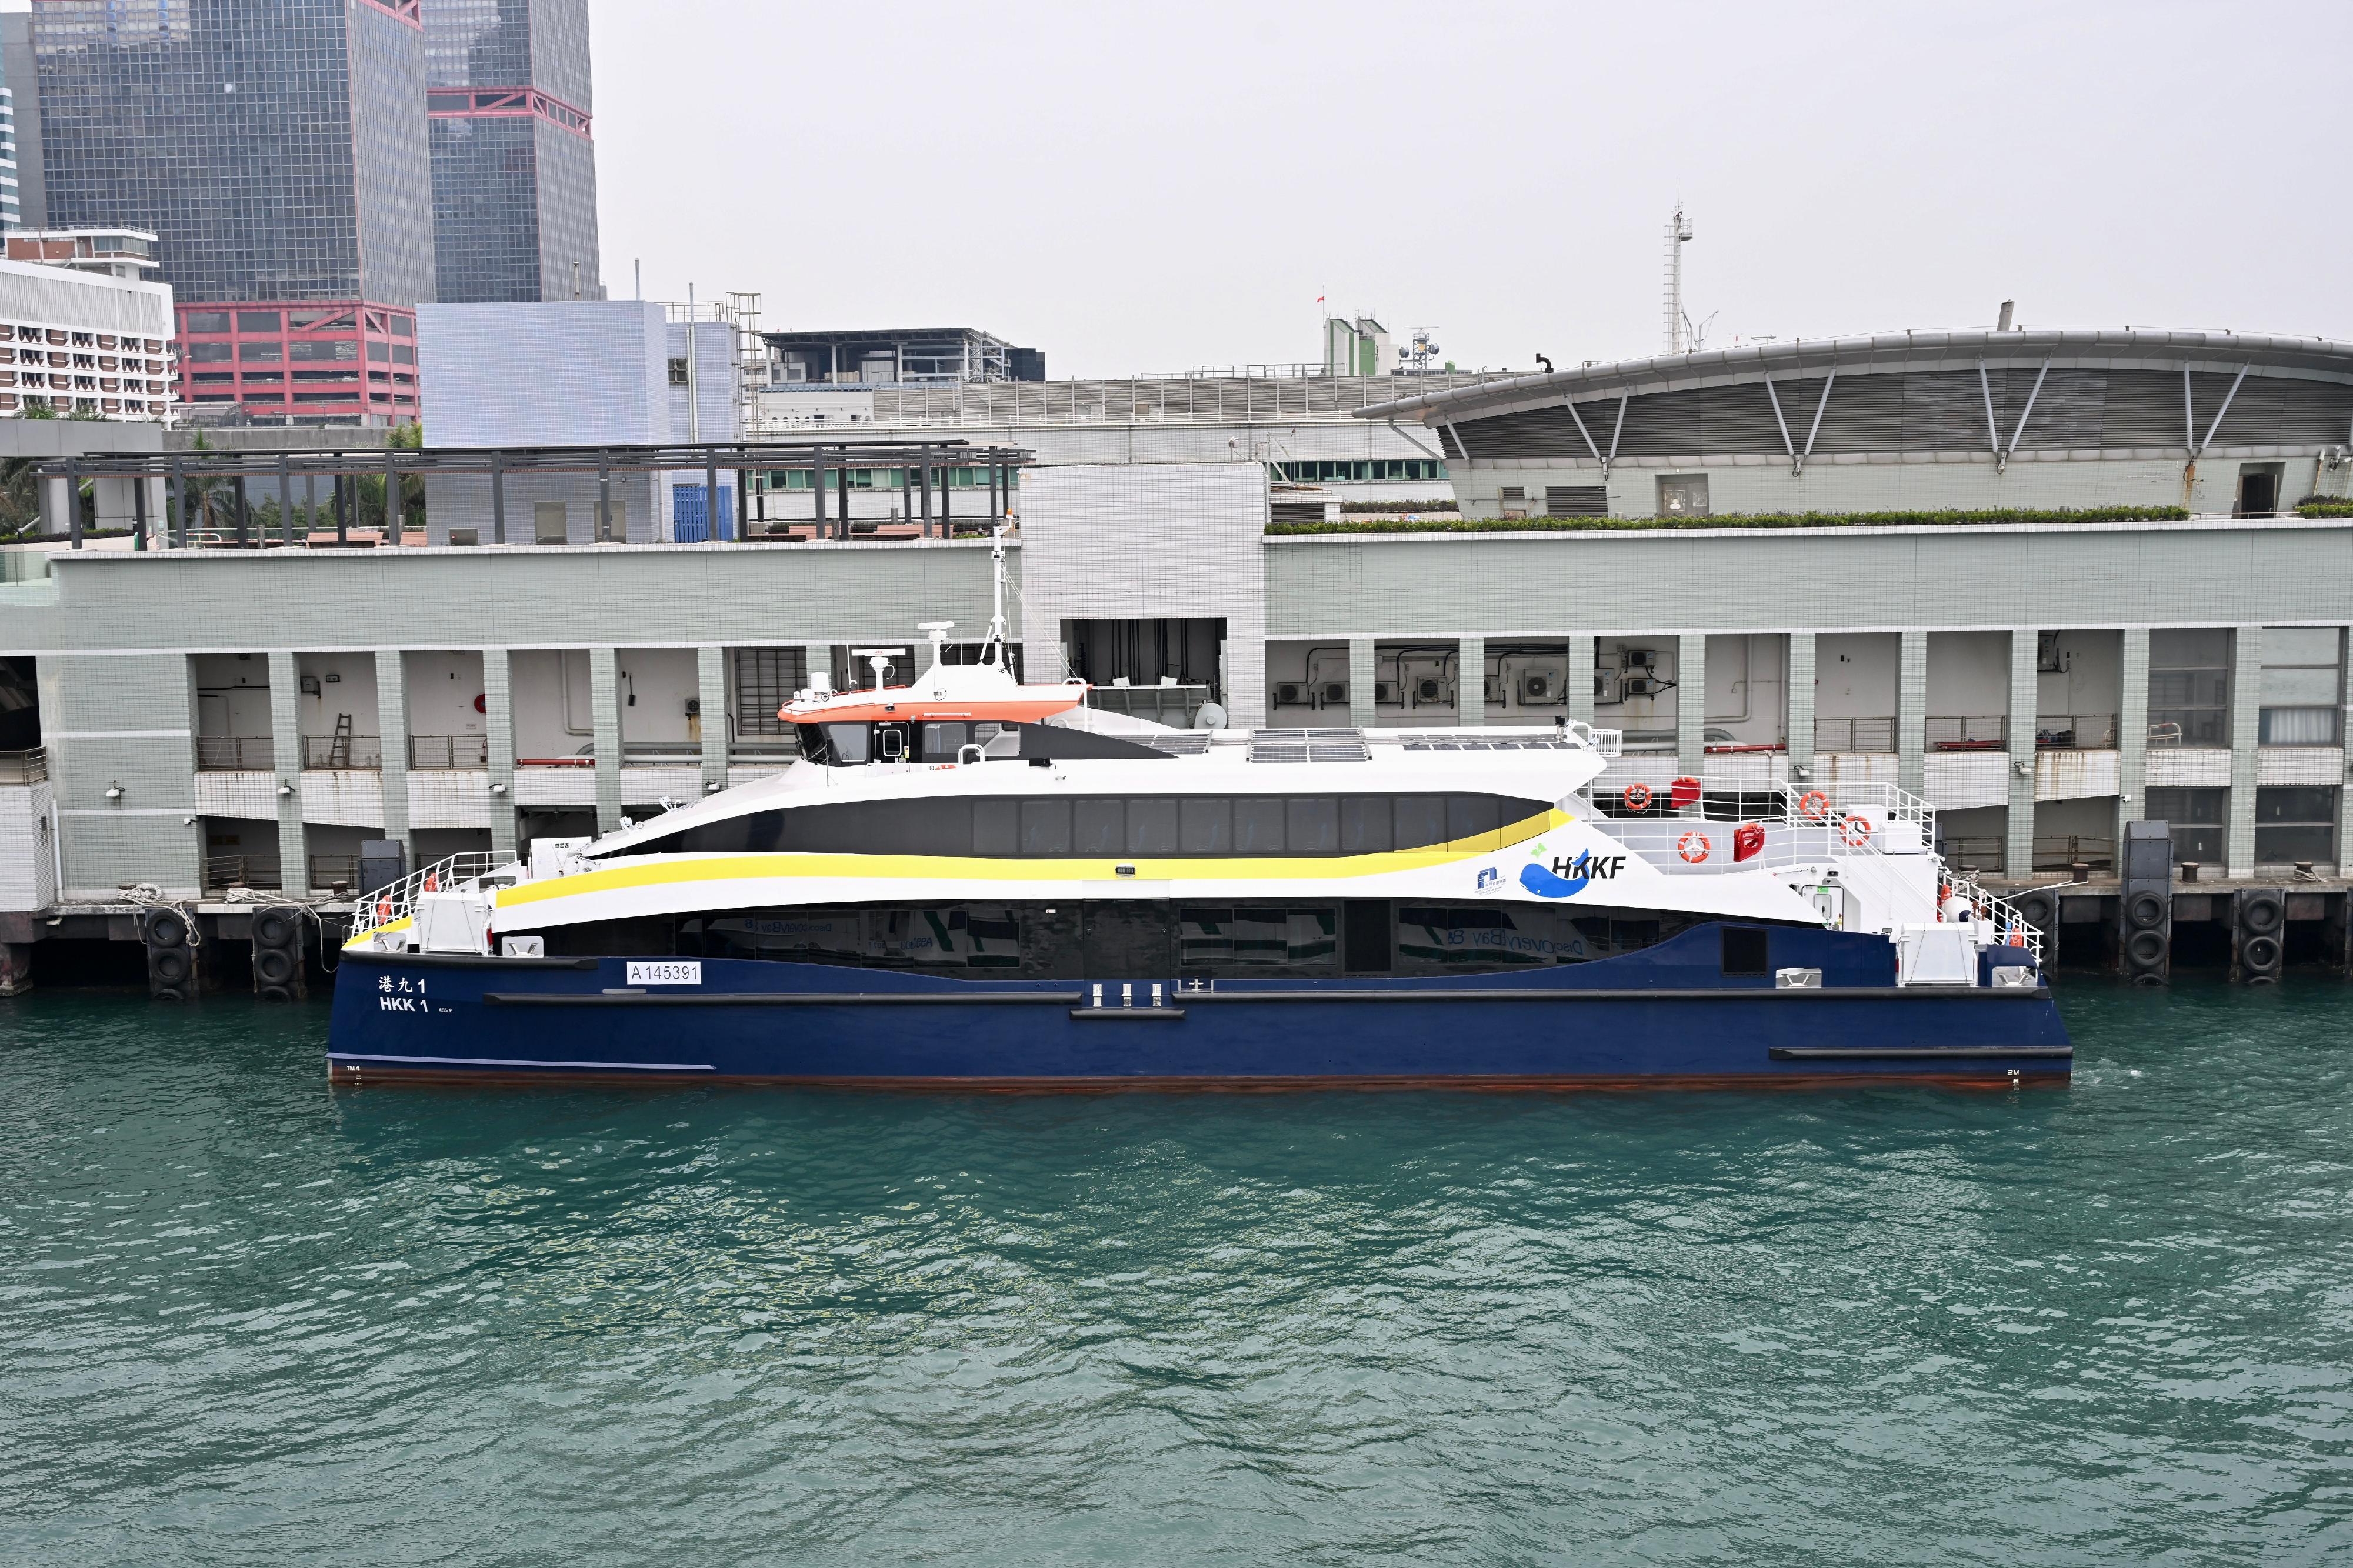 The Transport Department announced today (February 27) that the first batch of three fully government-subsidised new vessels procured under Phase I of the Vessel Subsidy Scheme will be gradually deployed to provide services from March this year. Photo shows the appearance of the new vessel operating the Central - Peng Chau route. The vessel features the newly designed promotional logo for government-funded projects.